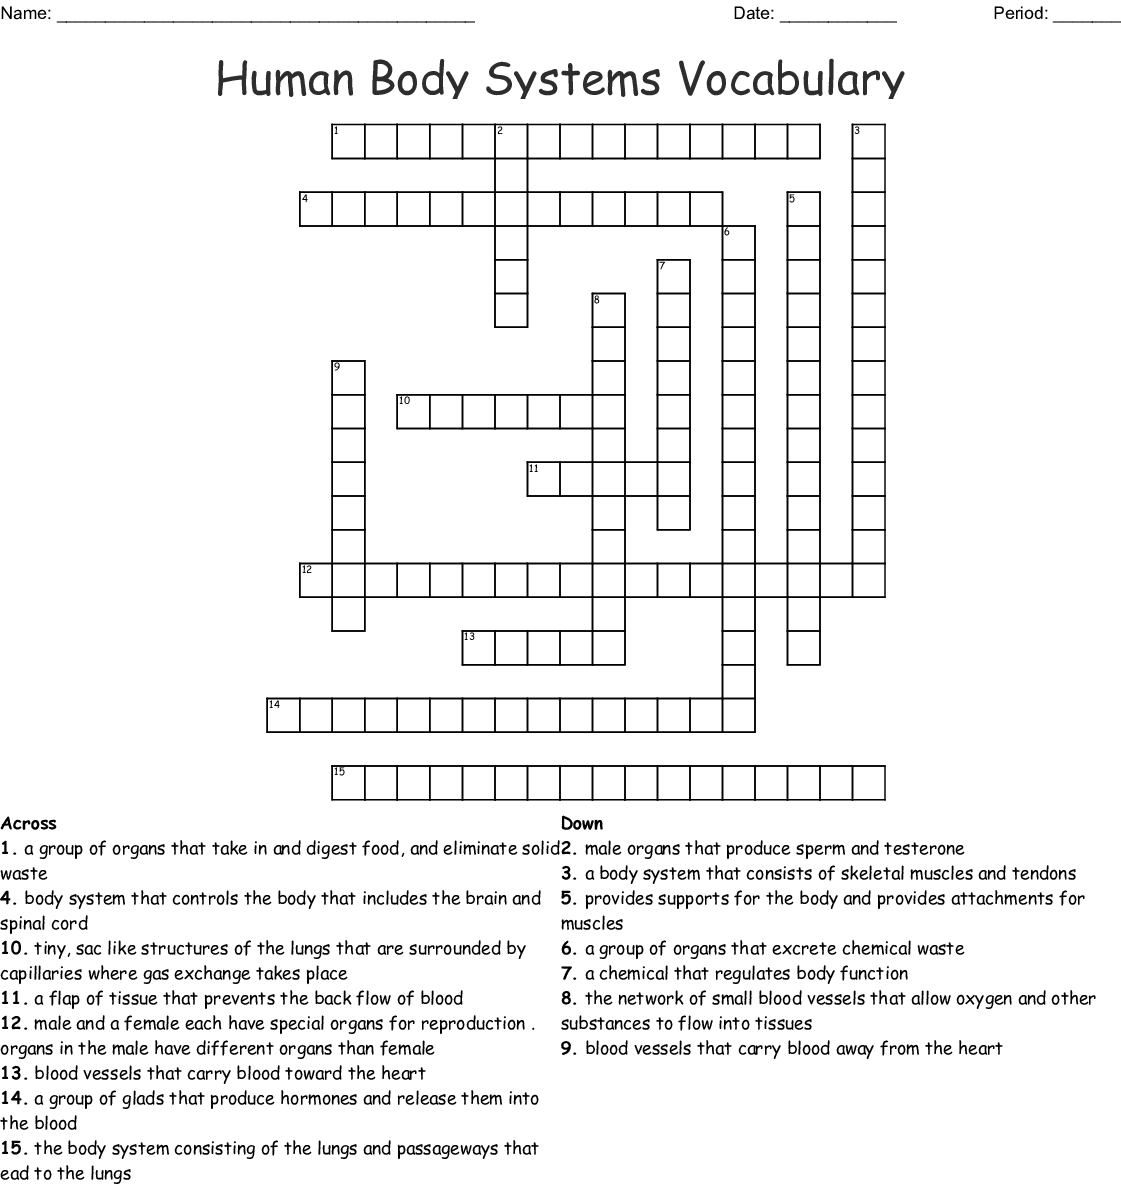 human-body-systems-crossword-puzzle-wordmint-bank2home